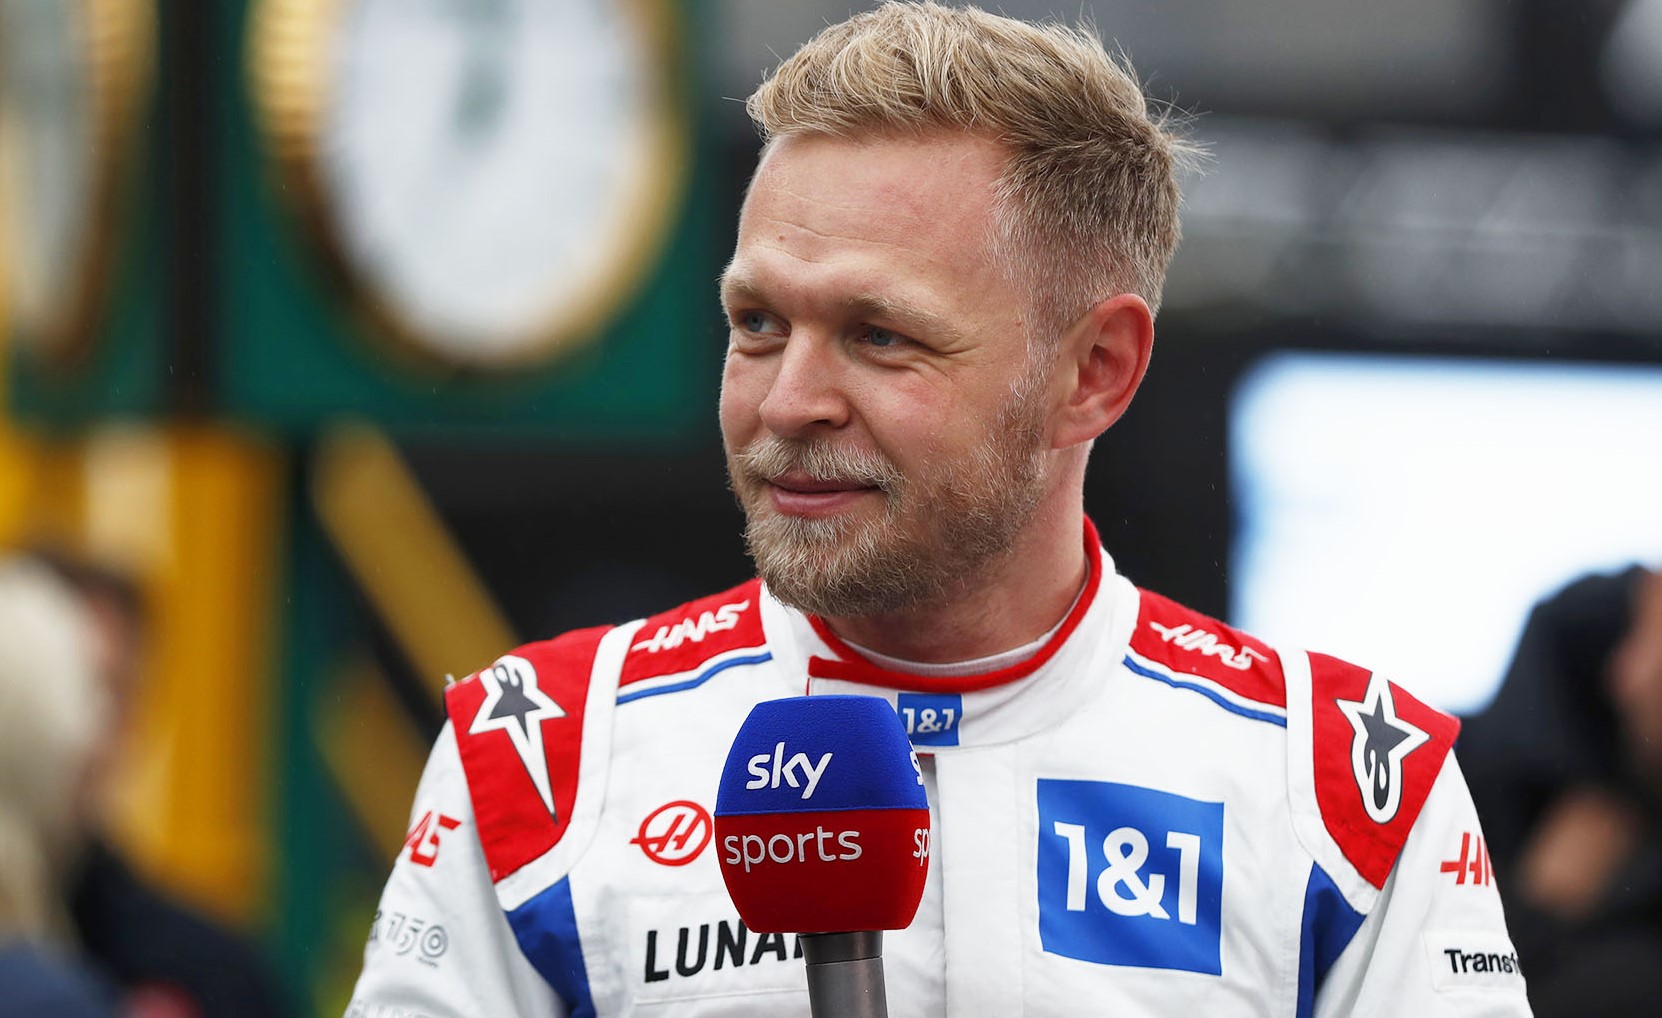 Kevin Magnussen sheds light on Schumacher's replacement